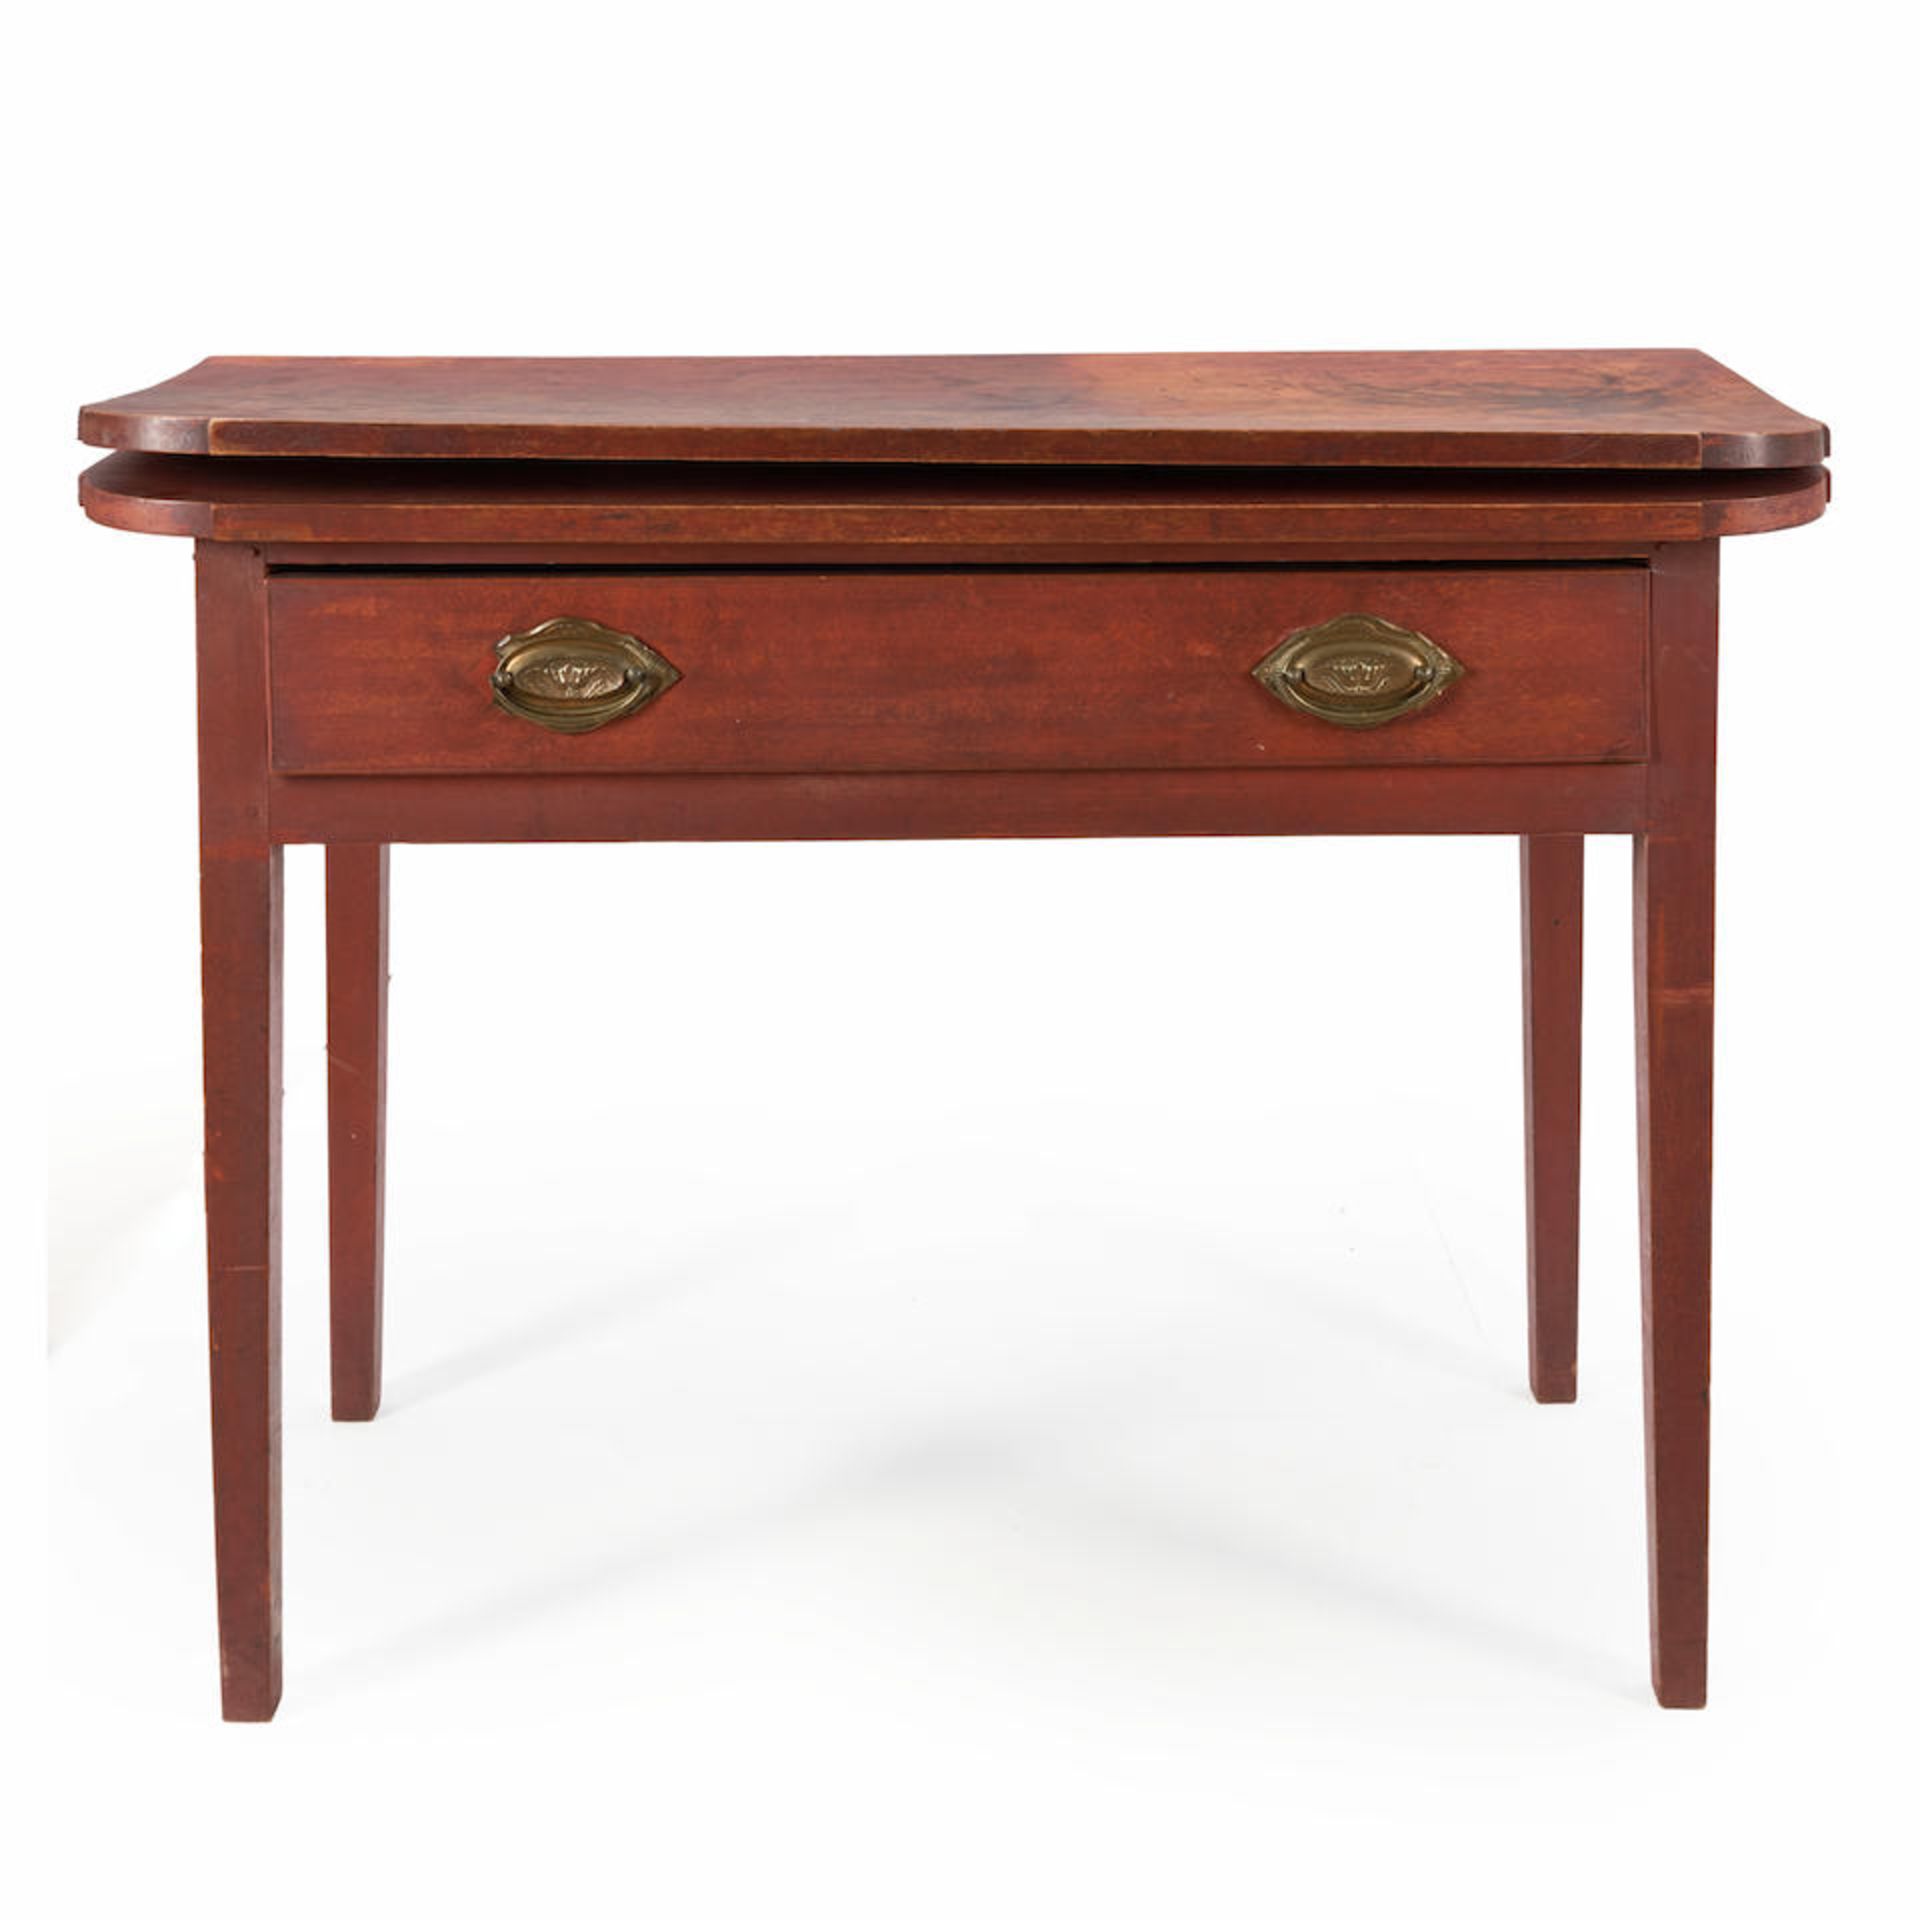 COUNTRY RED-PAINTED CARD TABLE - Image 4 of 4